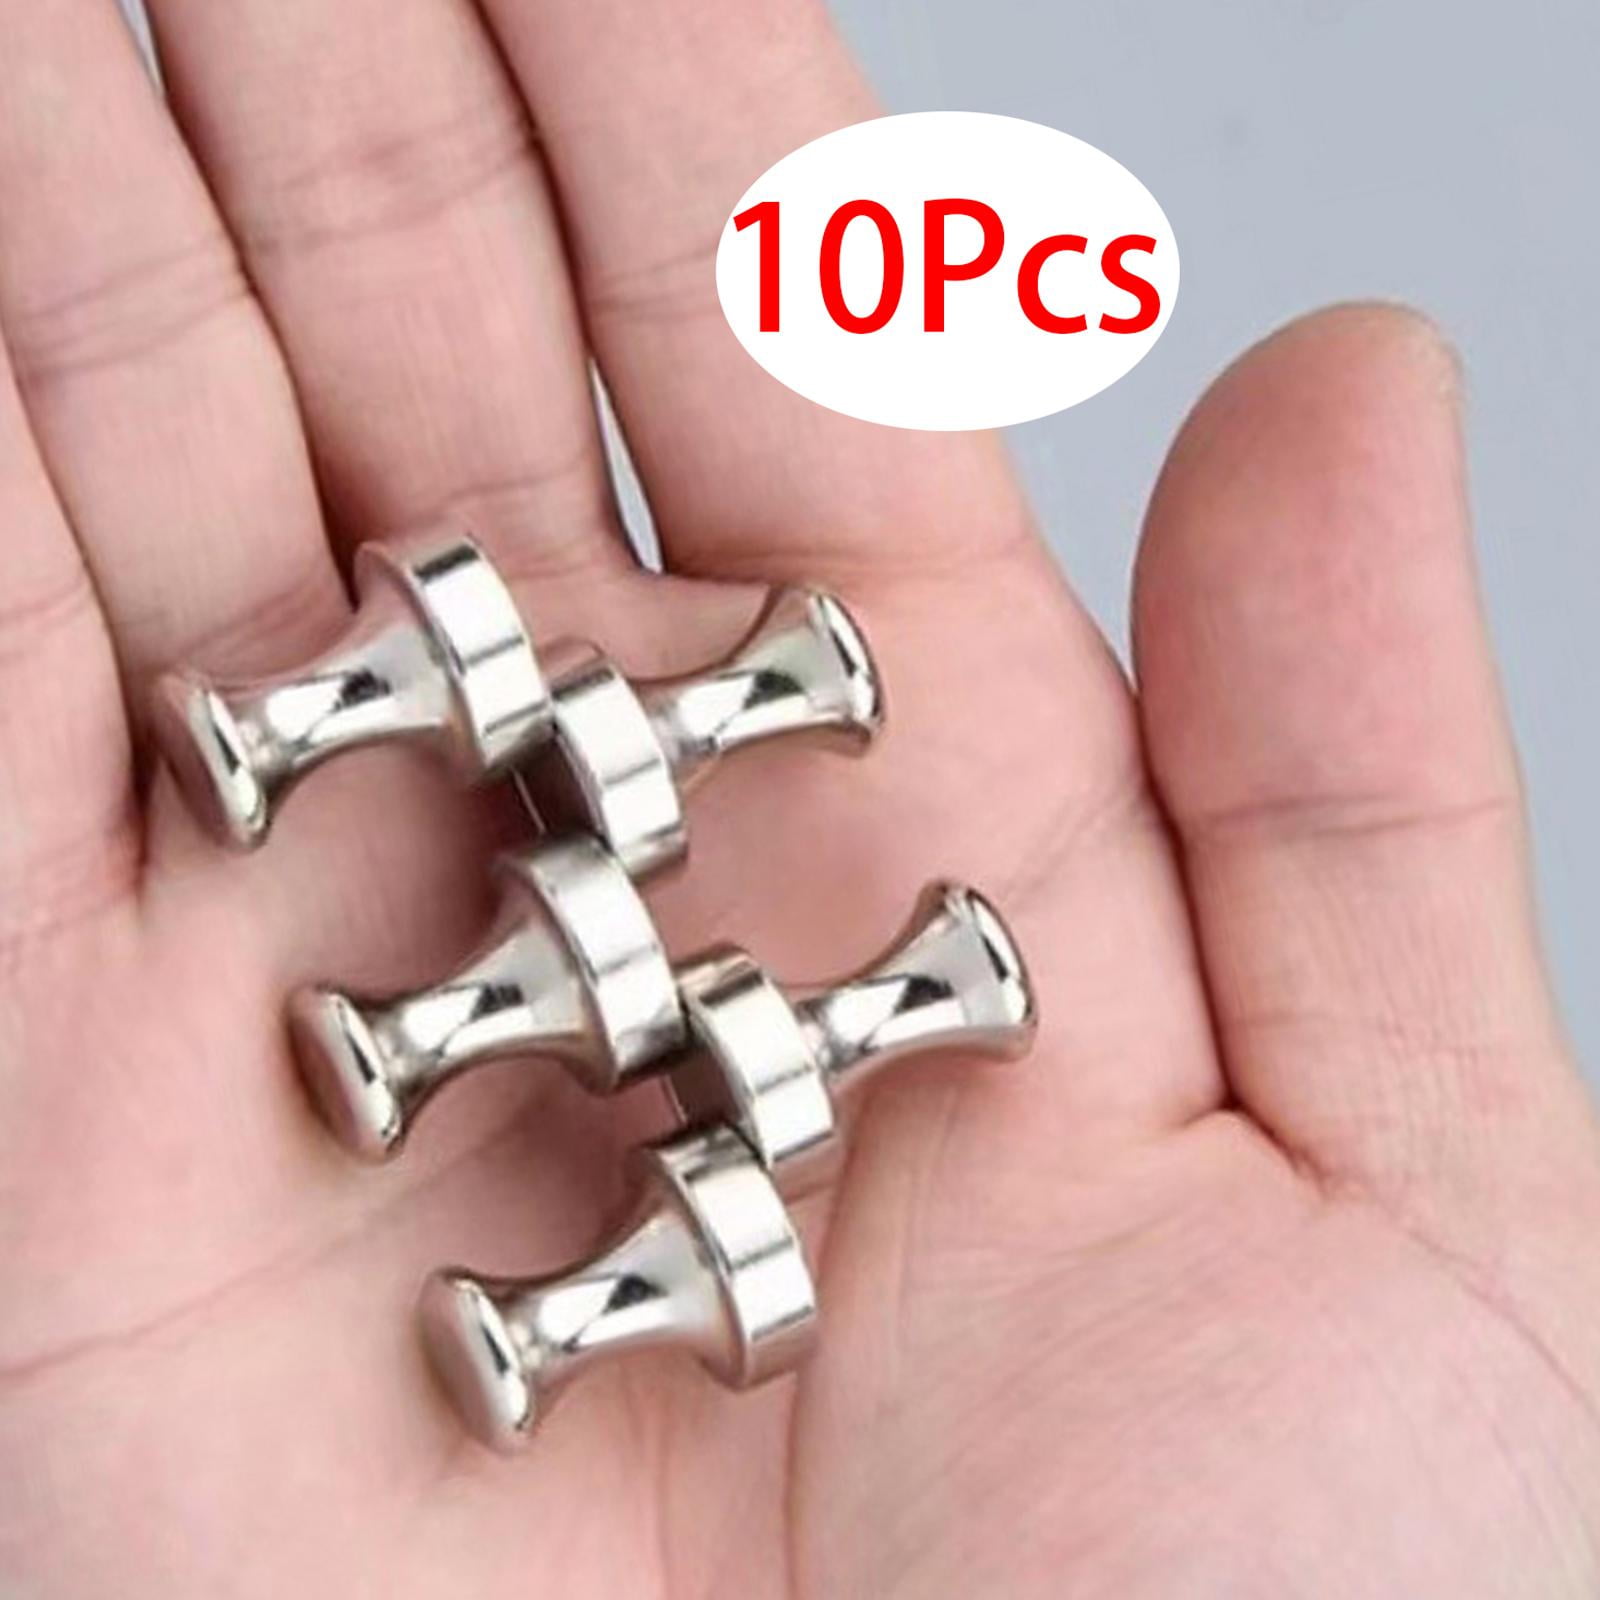 10 Pieces Push Pins Photos and Pictures Push Pins for Metal Surface Golden  